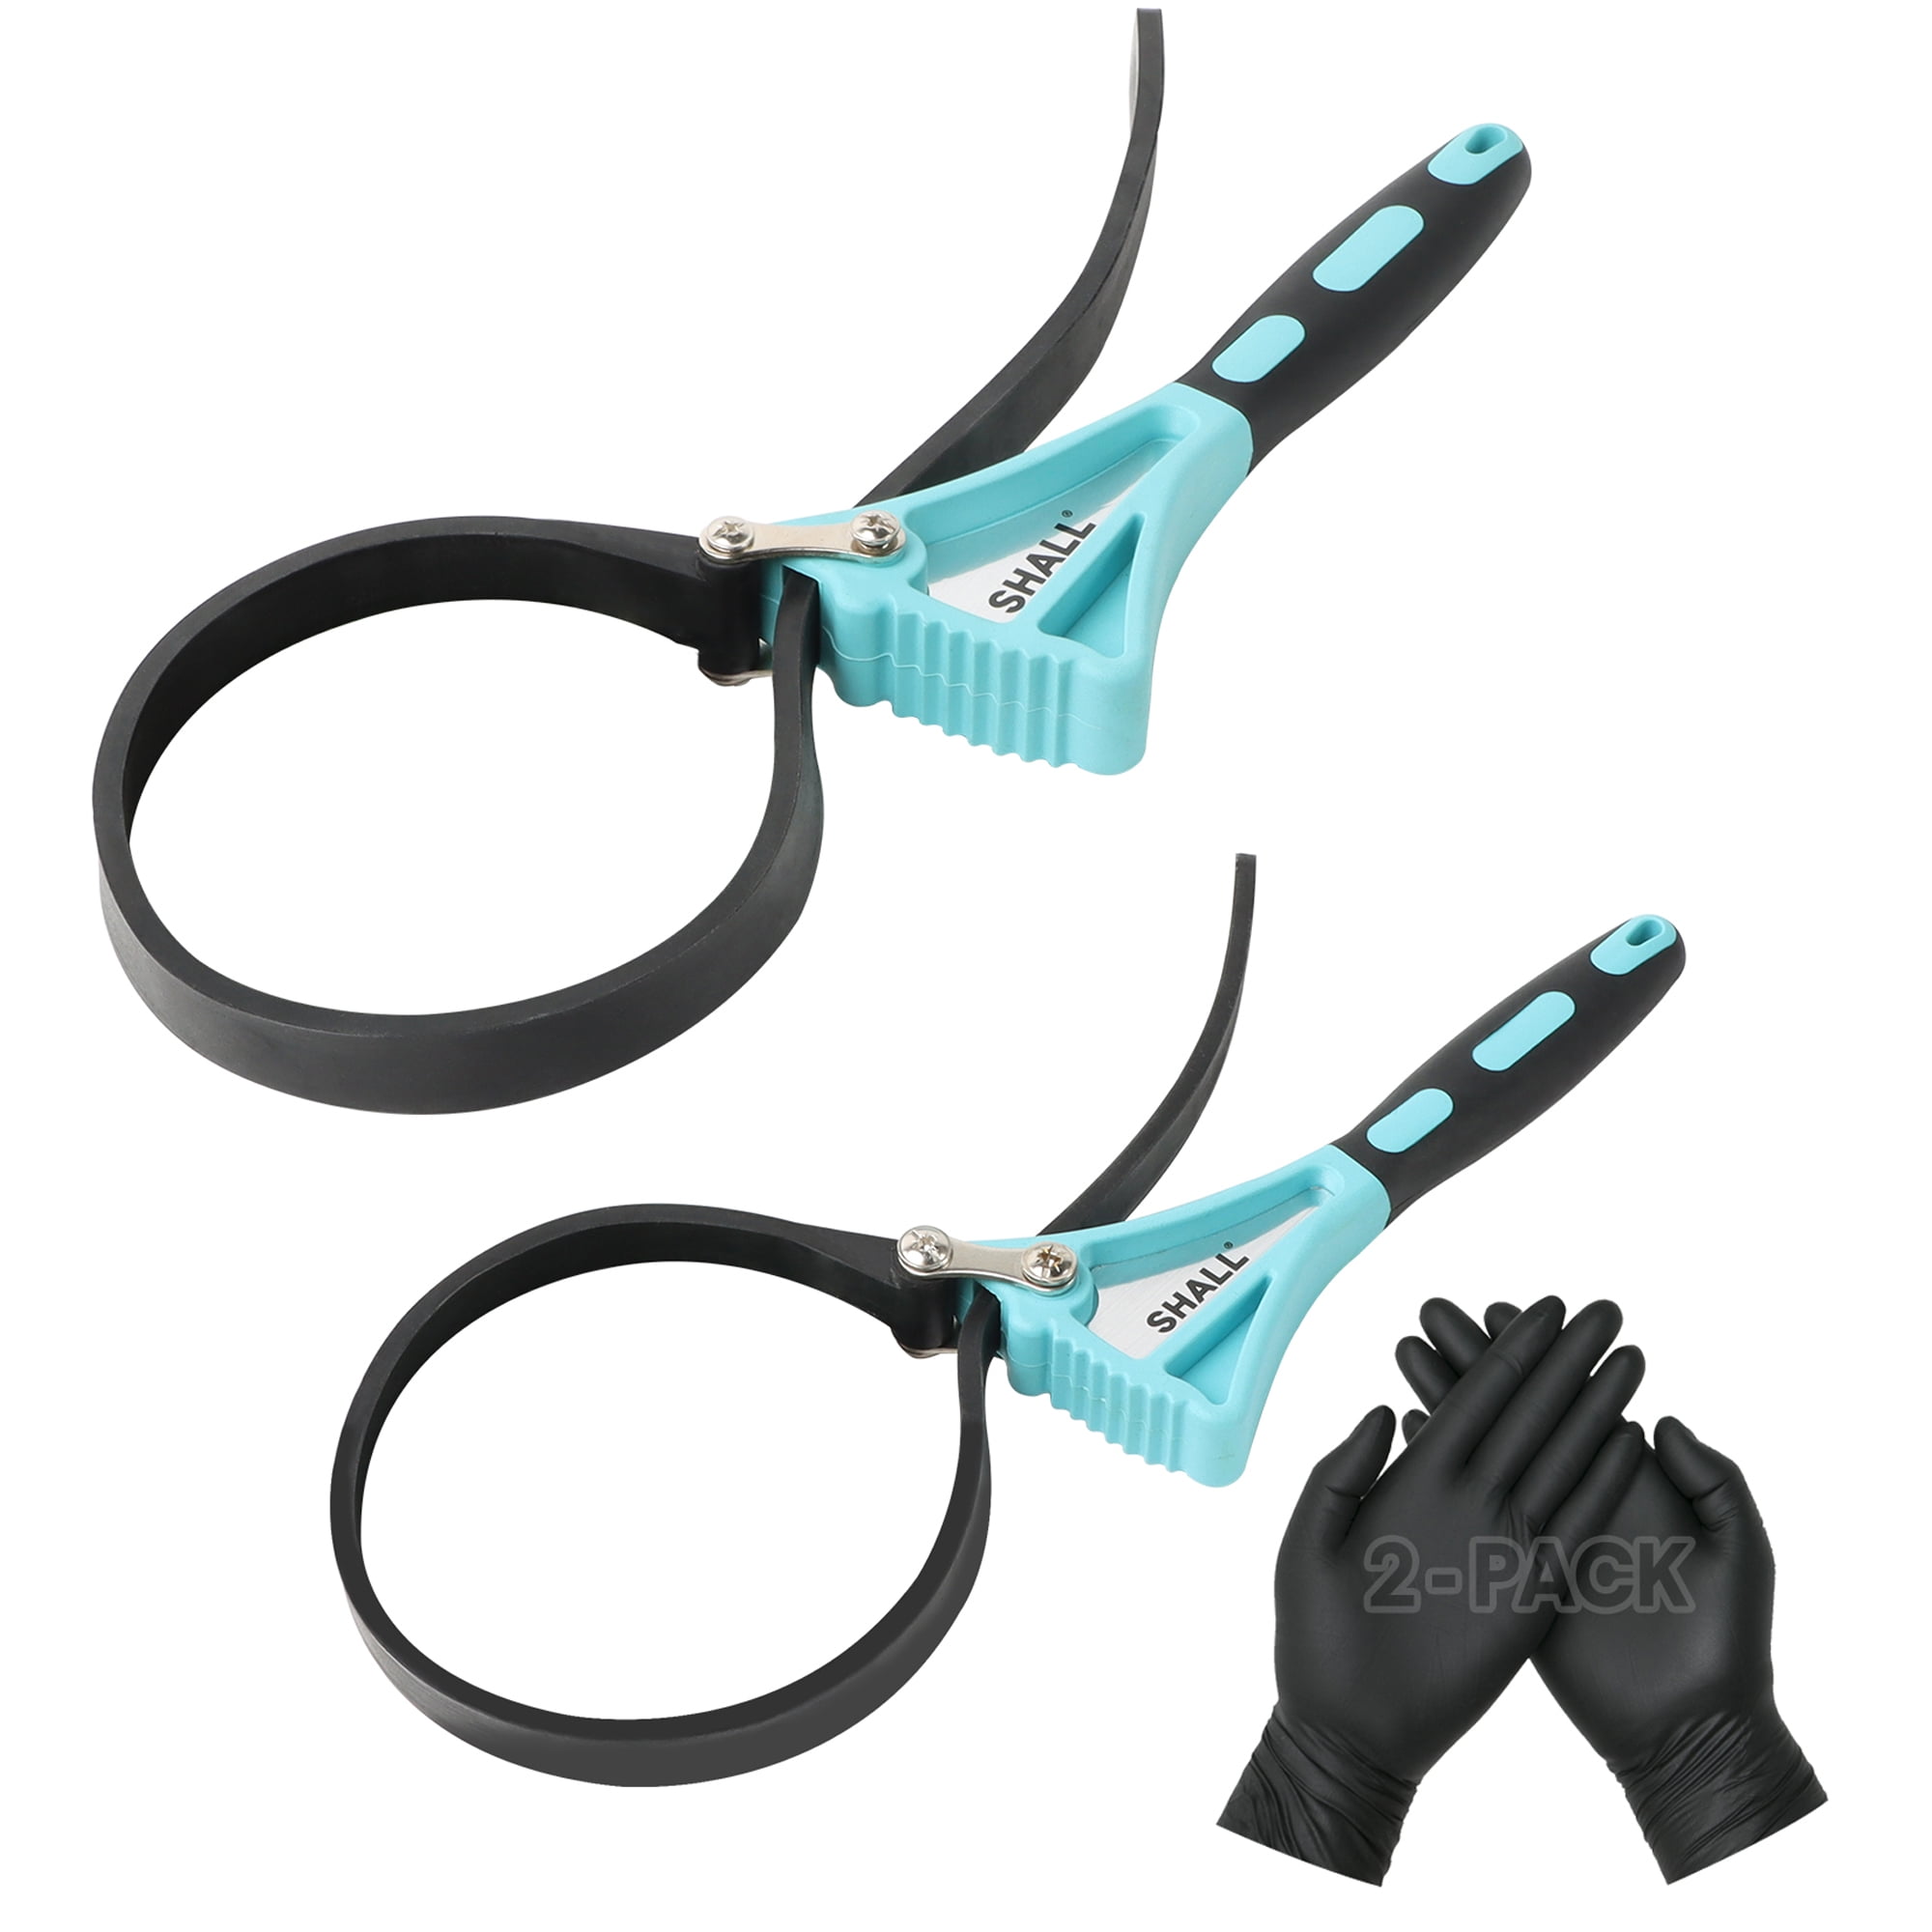 SHALL Oil Filter Wrench Set Rubber Strap Wrench 2-Pack PVC Gloves